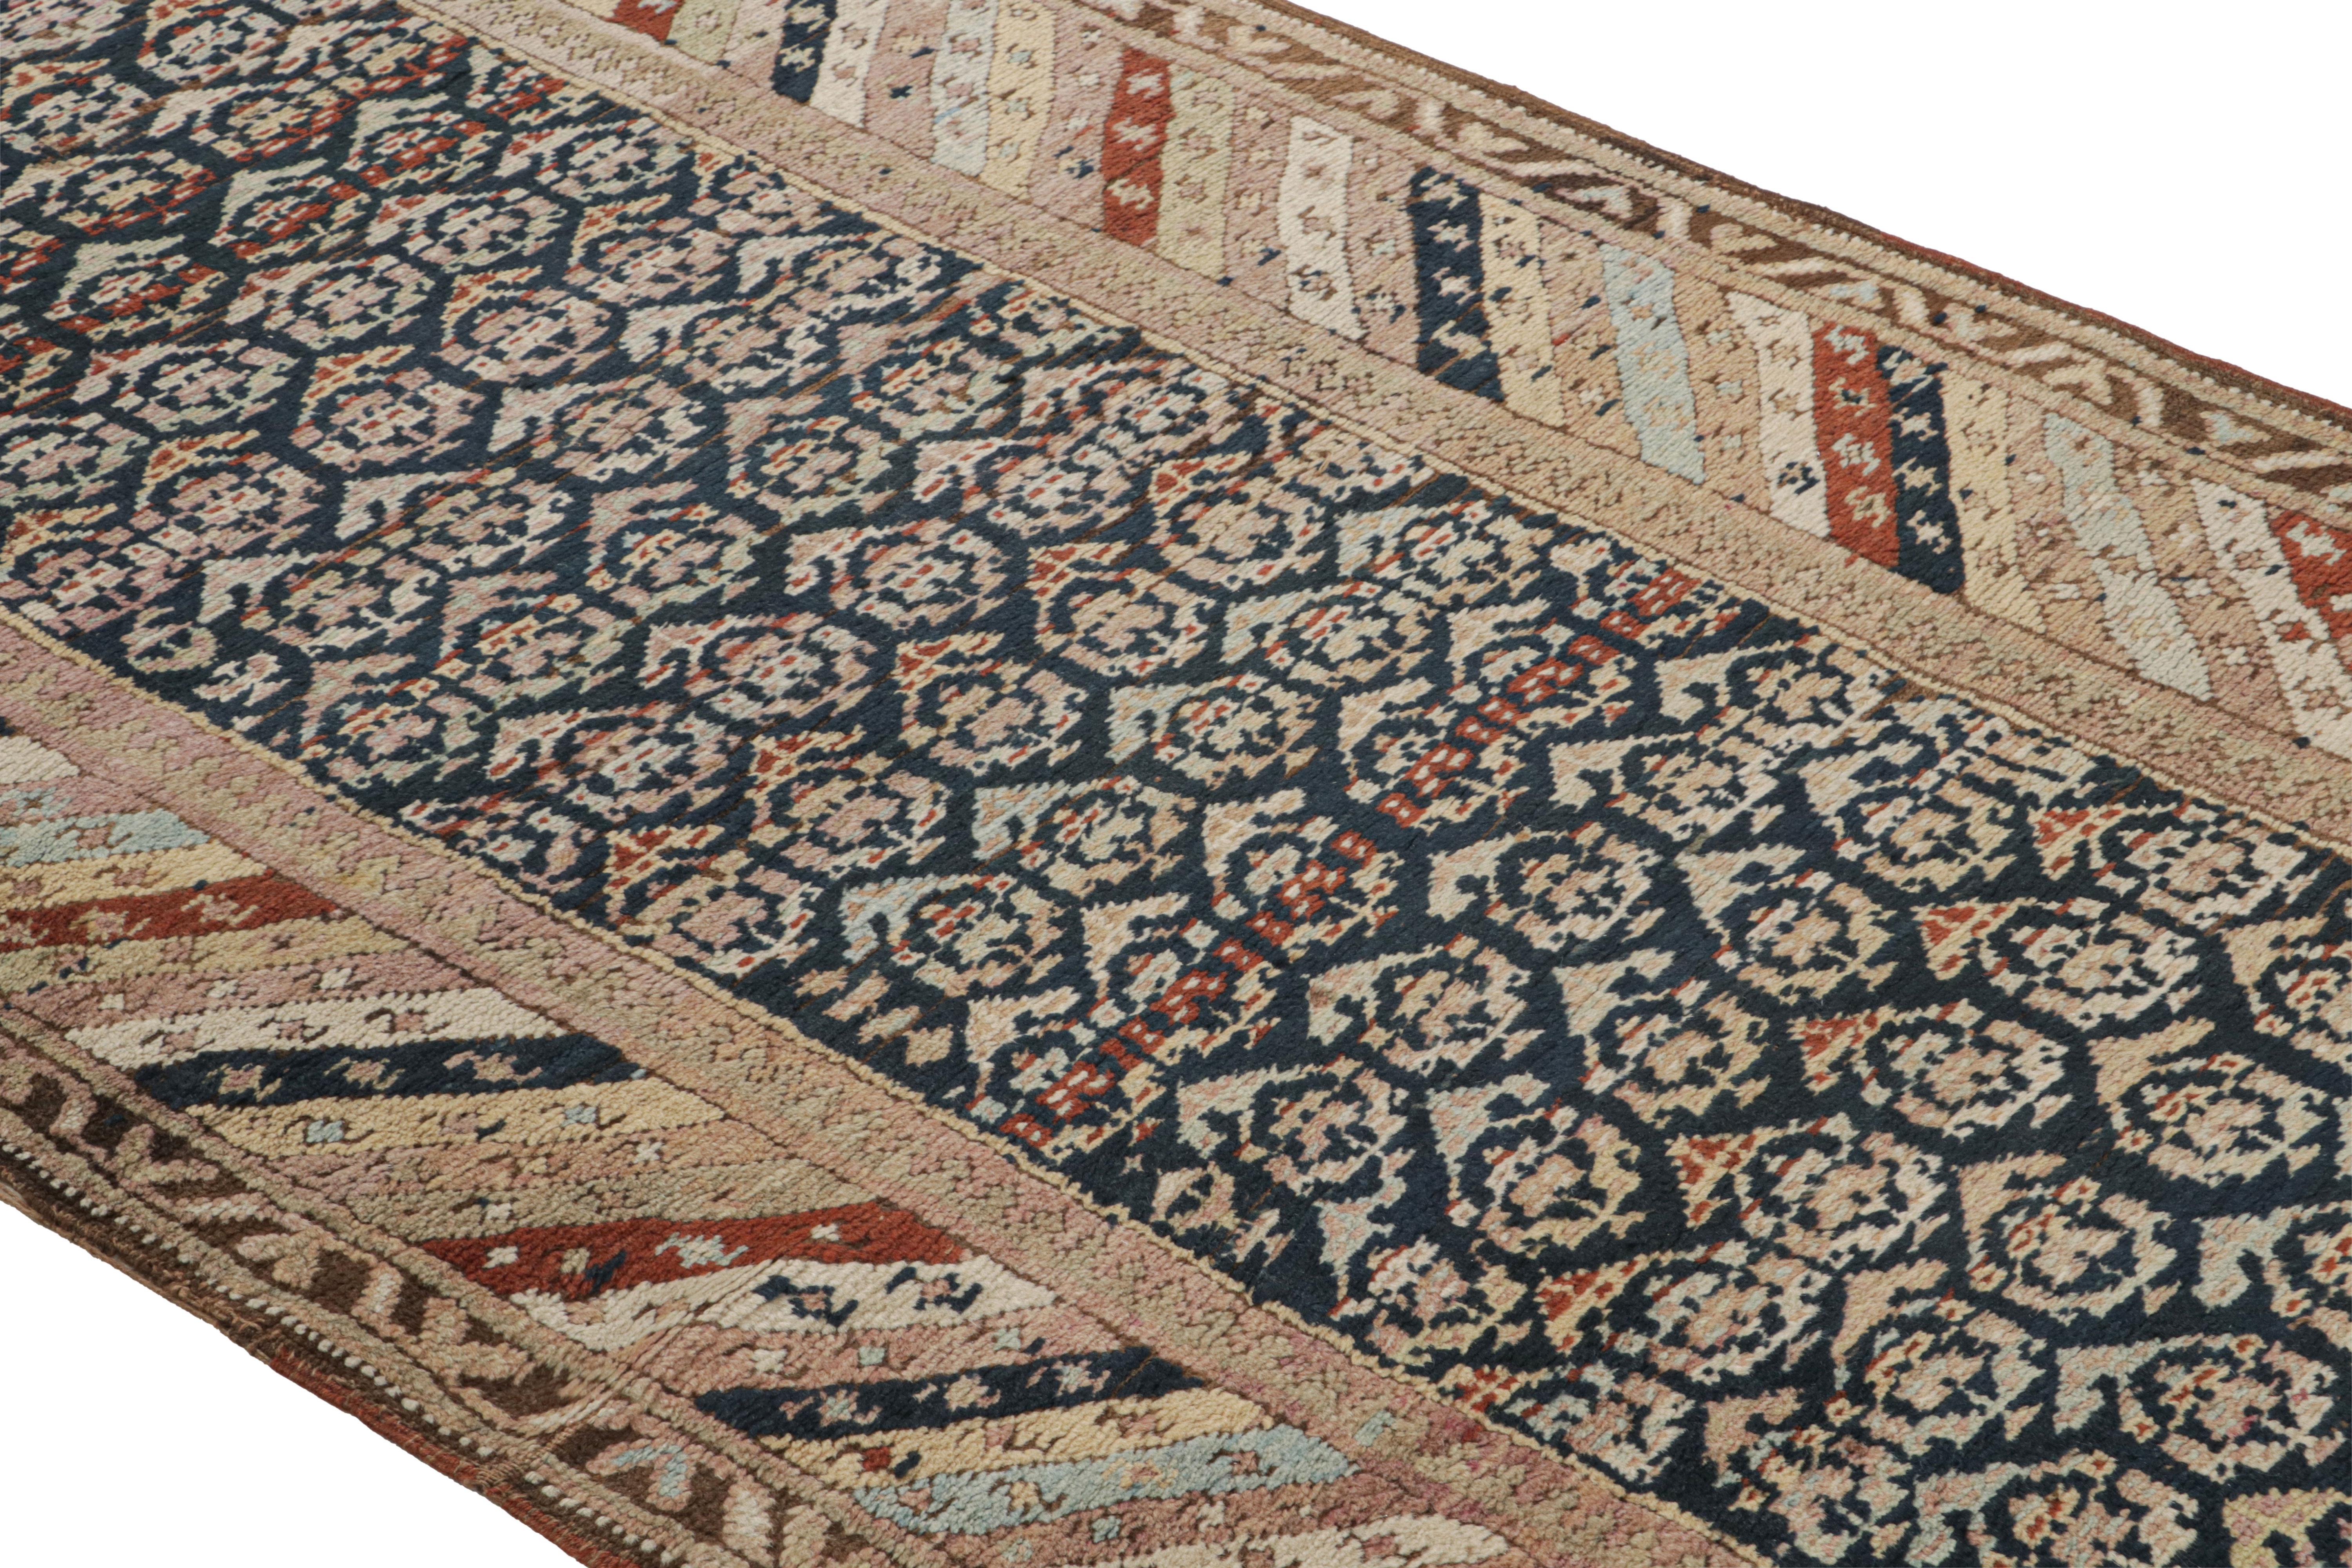 Hand knotted in wool originating from Russia circa 1890-1900, this antique runner connotes a 19th century Karabagh rug design, employing an atypical play of Classic beige-brown and black hues in portraying the Classic boteh (paisley) pattern as its